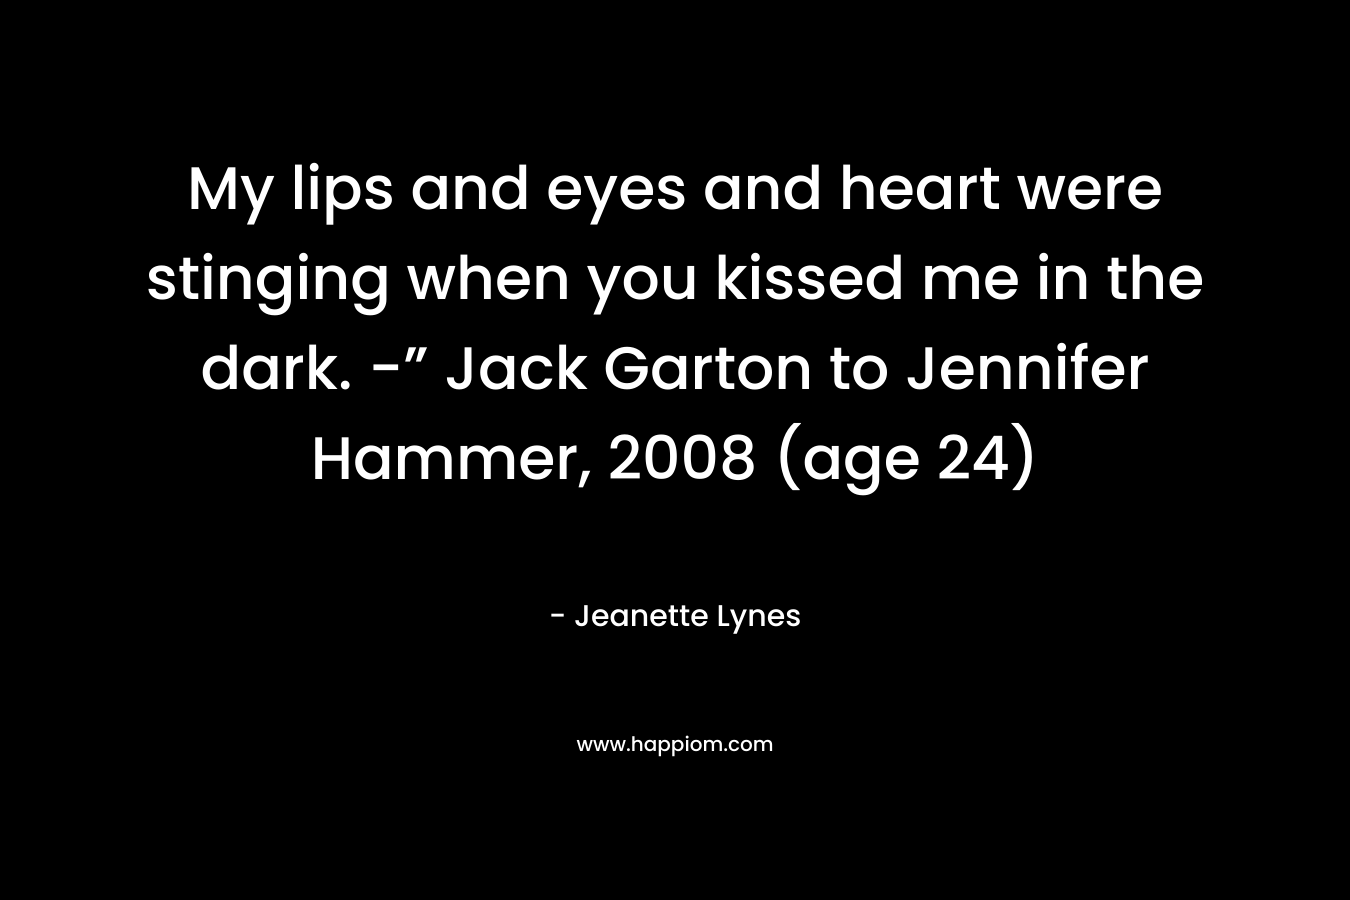 My lips and eyes and heart were stinging when you kissed me in the dark. -” Jack Garton to Jennifer Hammer, 2008 (age 24)